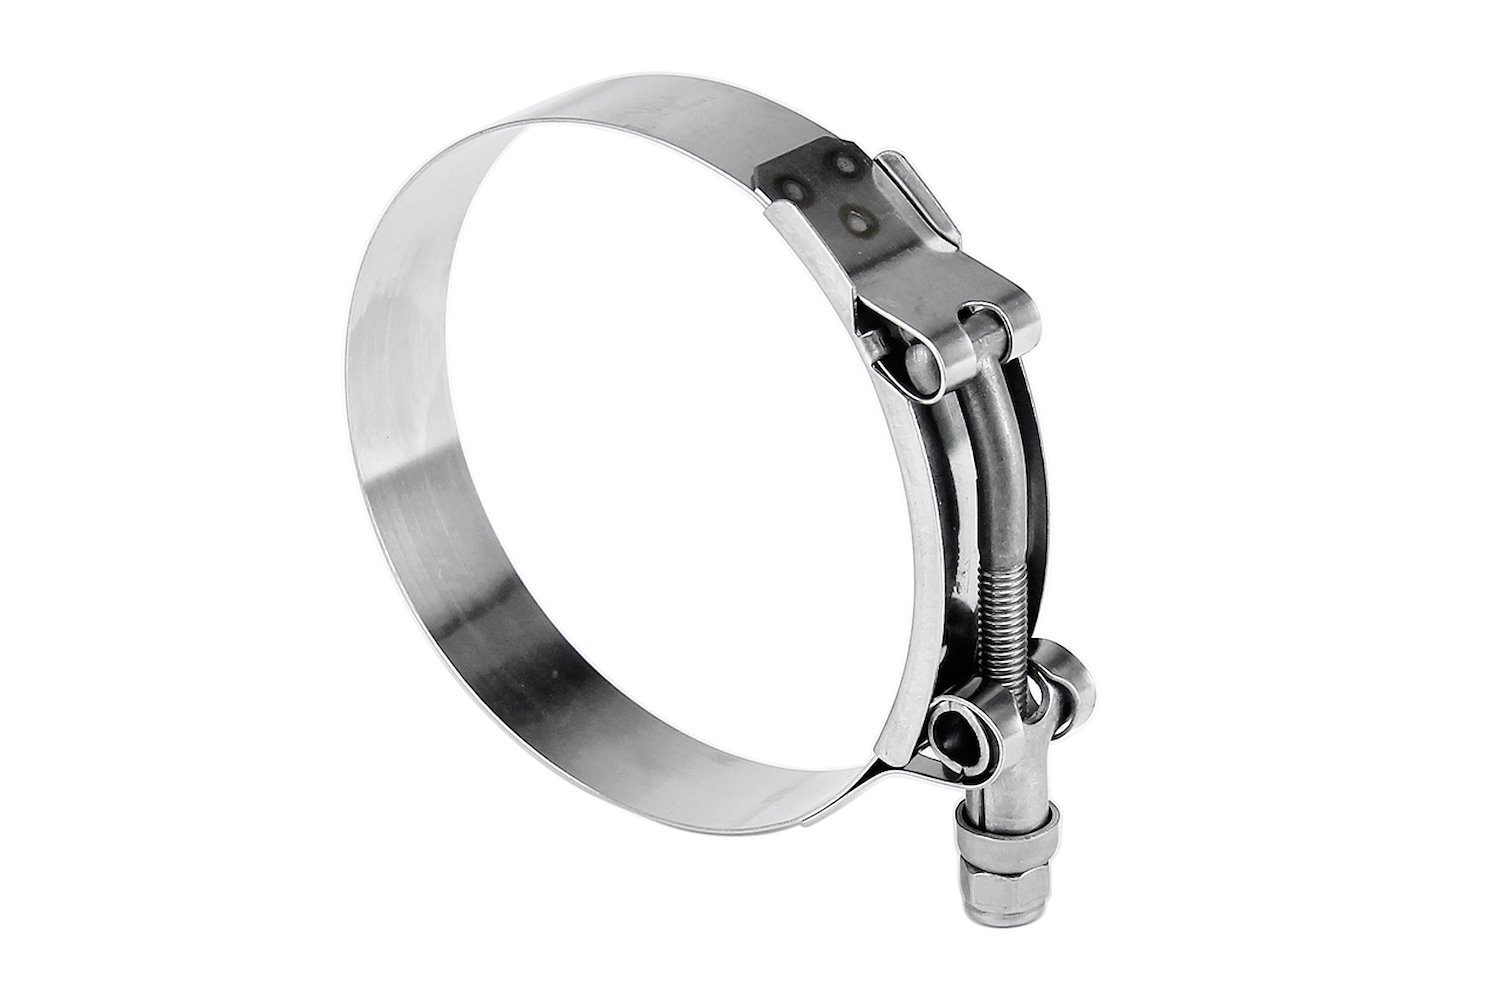 316-SSTC-48-56 100-Percent Marine Grade Stainless Steel T-Bolt Hose Clamp, Size #32, Range: 1.89 in.- 2.2 in.